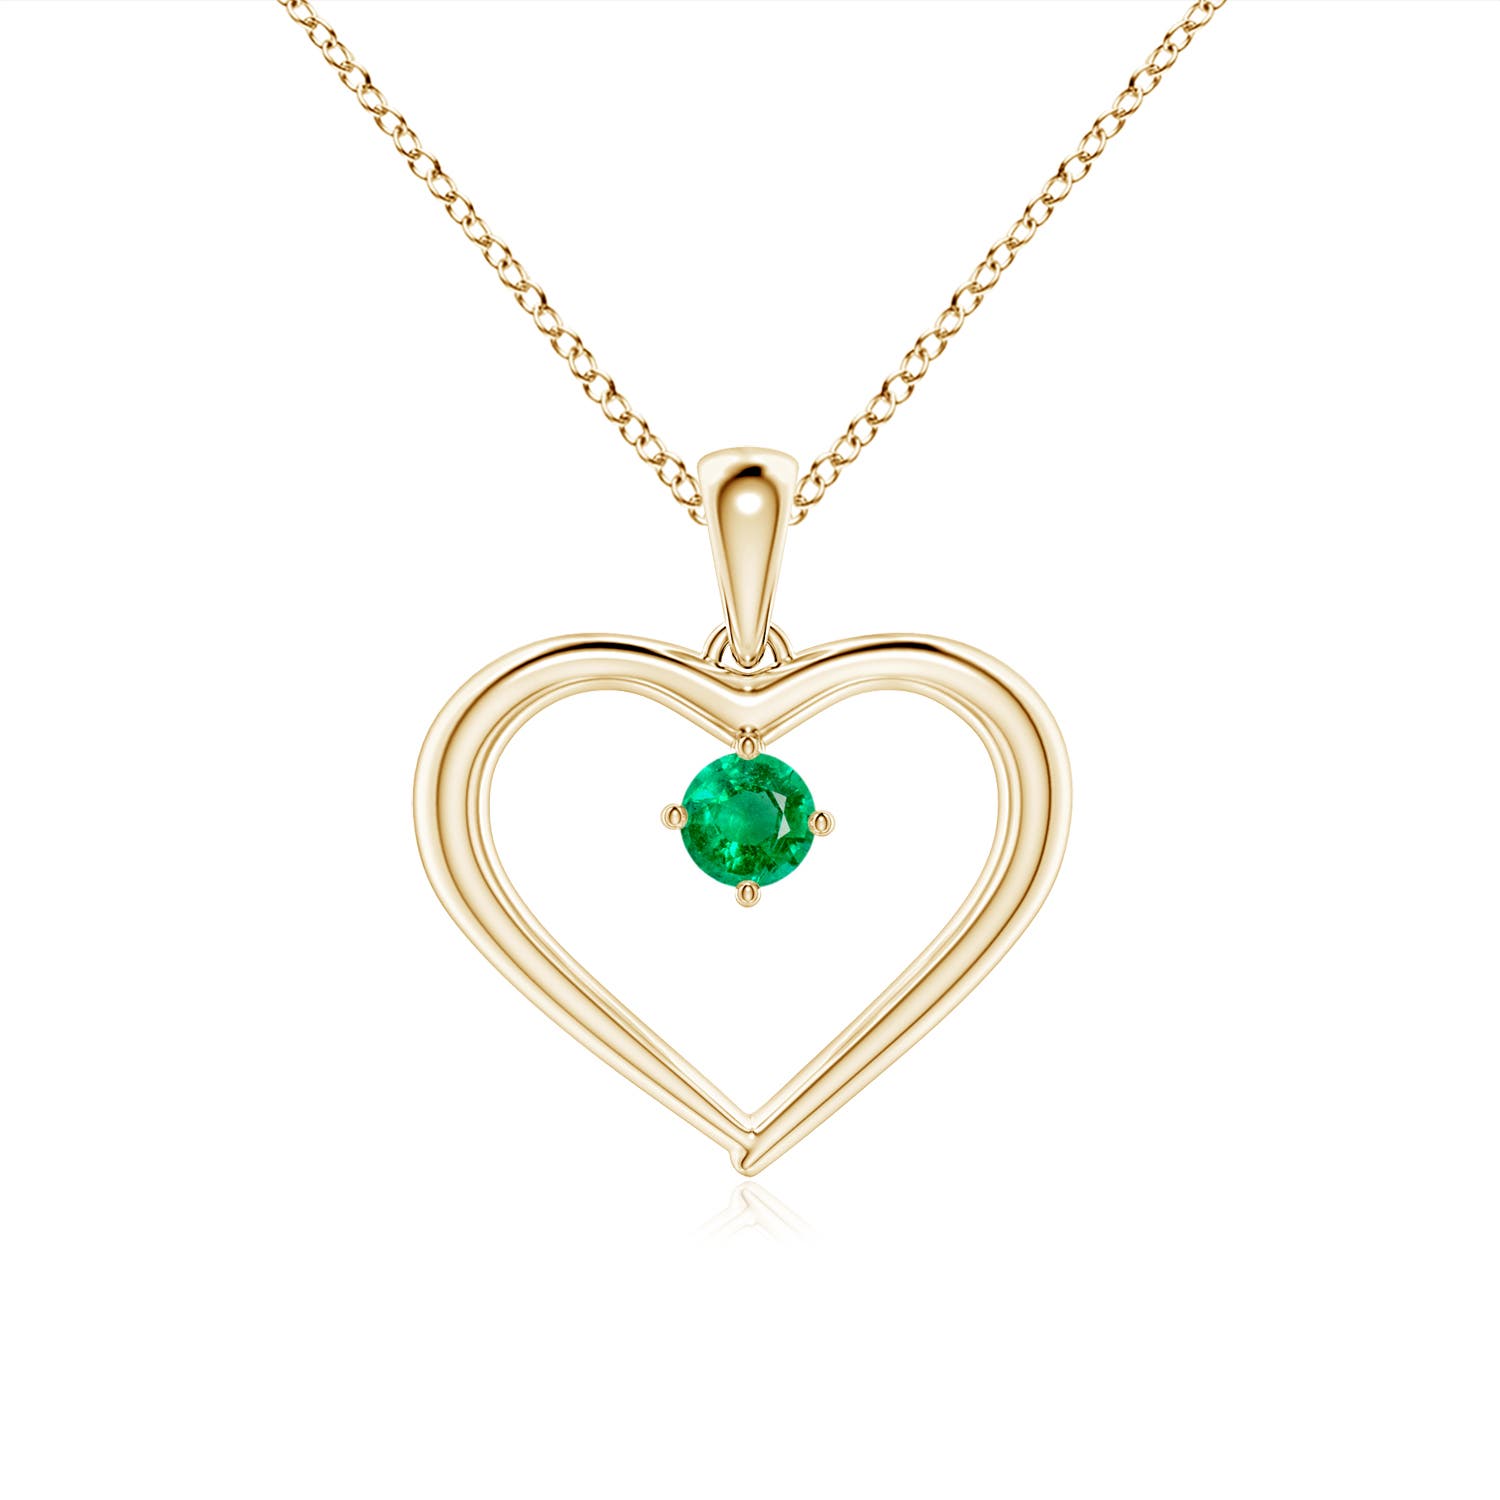 AAA - Emerald / 0.1 CT / 14 KT Yellow Gold